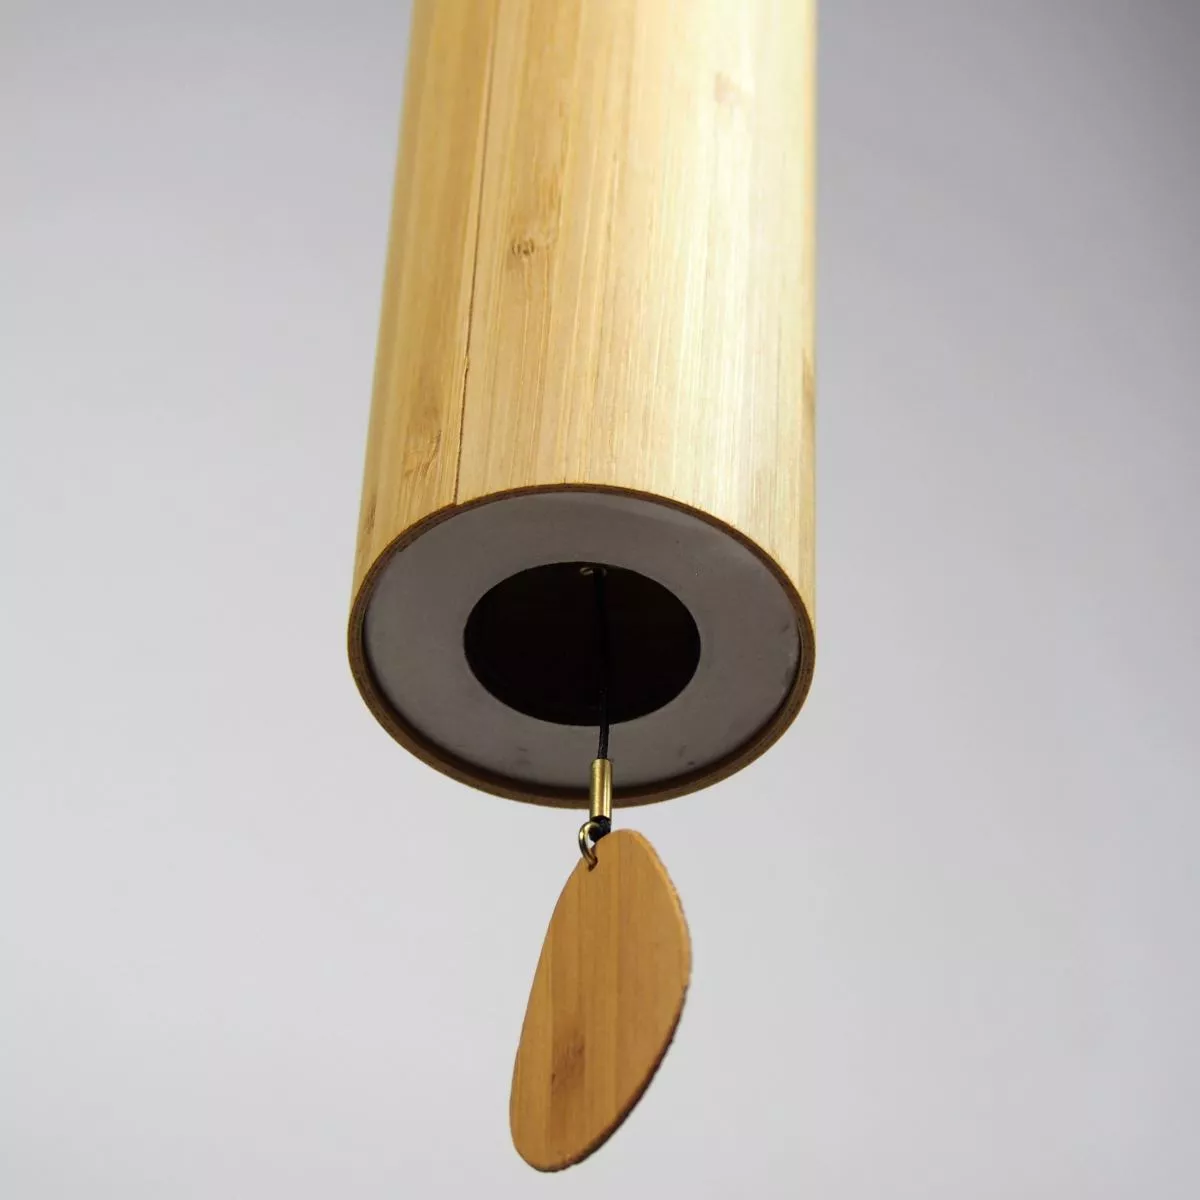 Handcrafted Wind Chime "Ignis" with Bamboo Cylinder